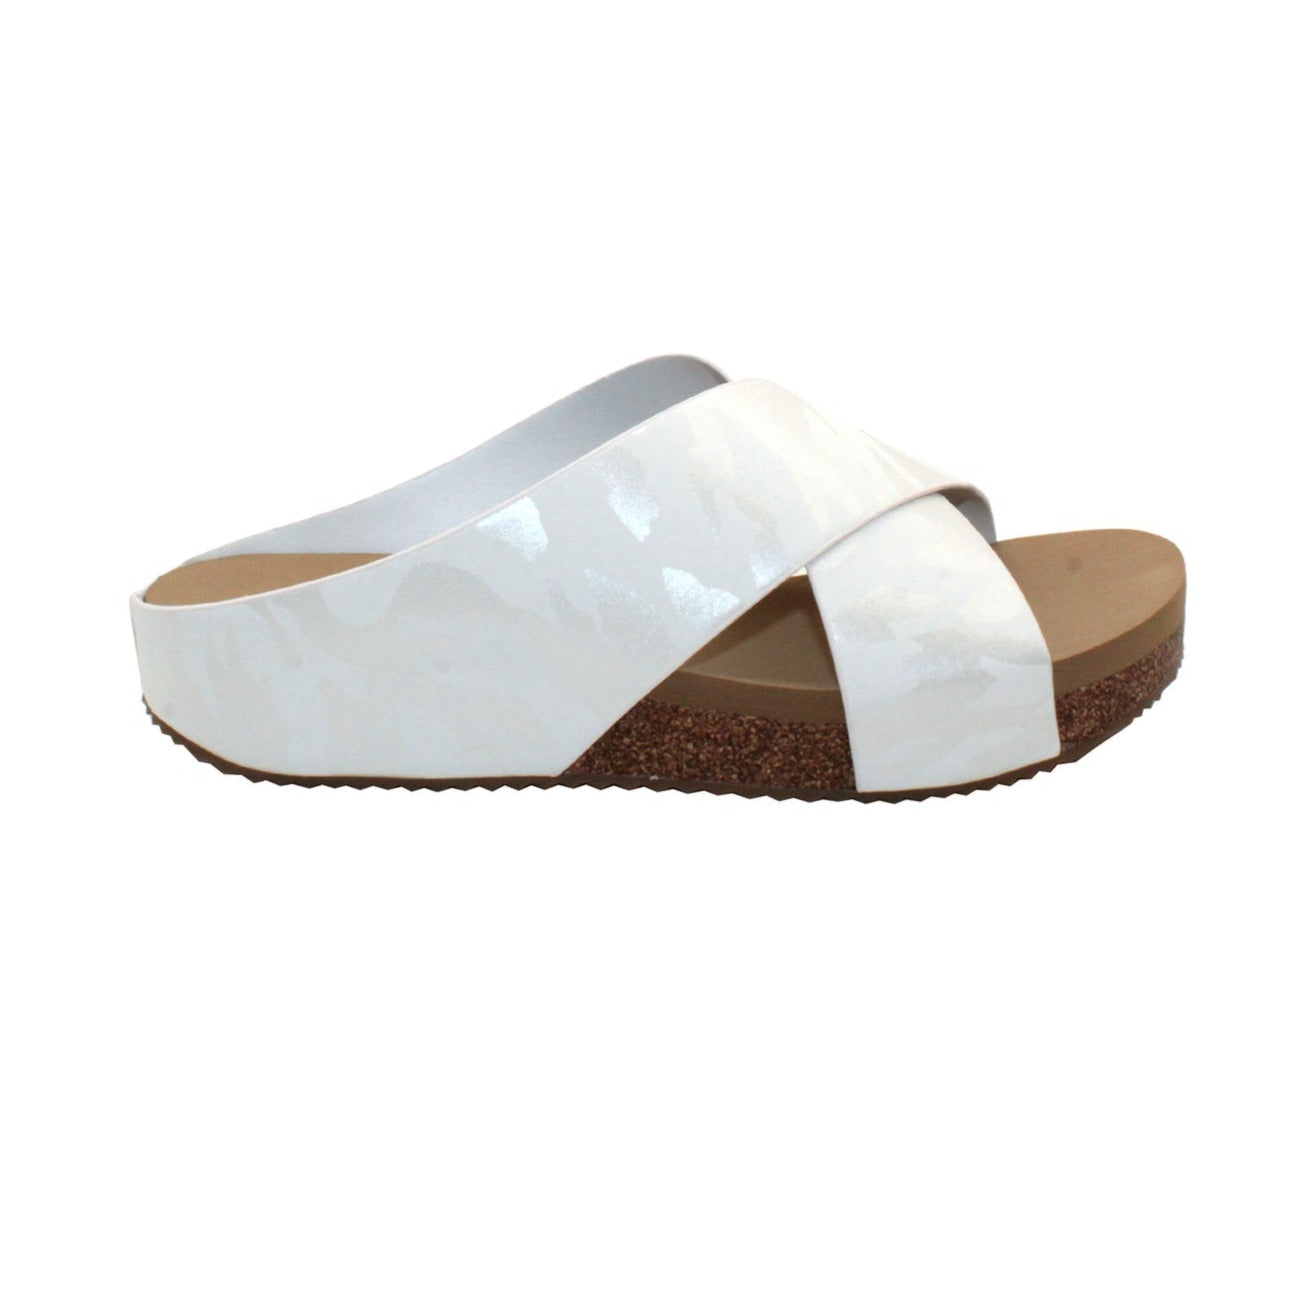 Volatile’s leather Ablette crisscross slides are everything you’d want in a warm weather sandal, they’re stylish, versatile, and endlessly comfortable. Featuring Volatile’s signature ultra-comfort EVA insole stationed on a modest low wedge, these are ideal for all day walking. Wear yours with everything from patterned skirts to distressed denim.